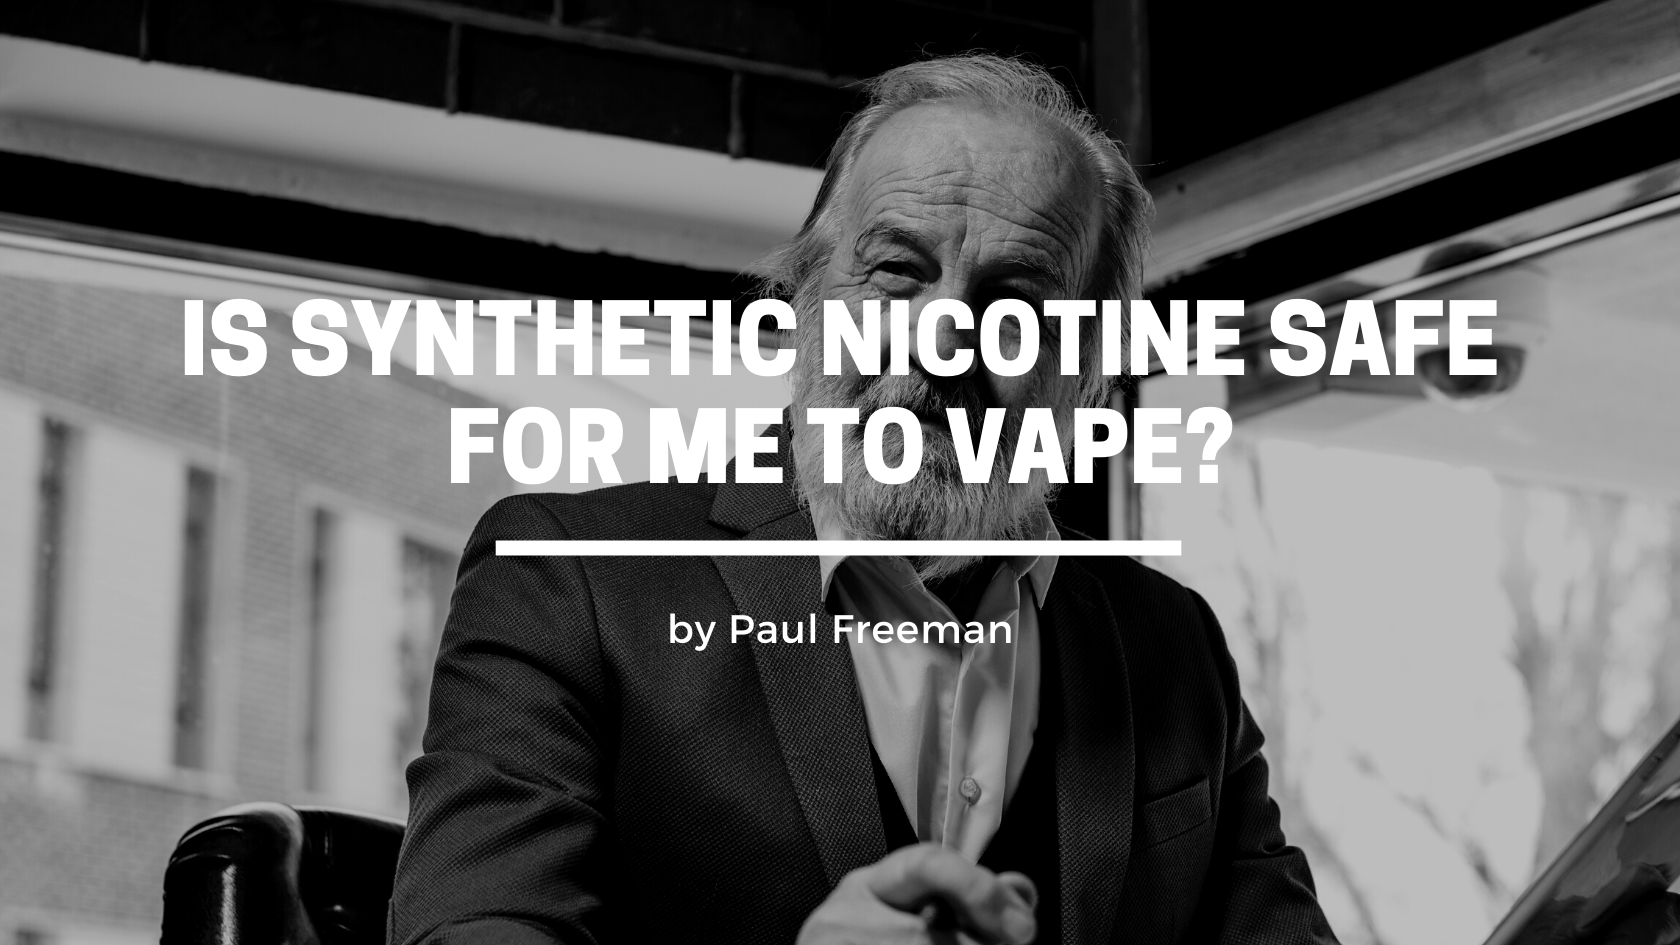 Is Synthetic Nicotine Safe for me to Vape?